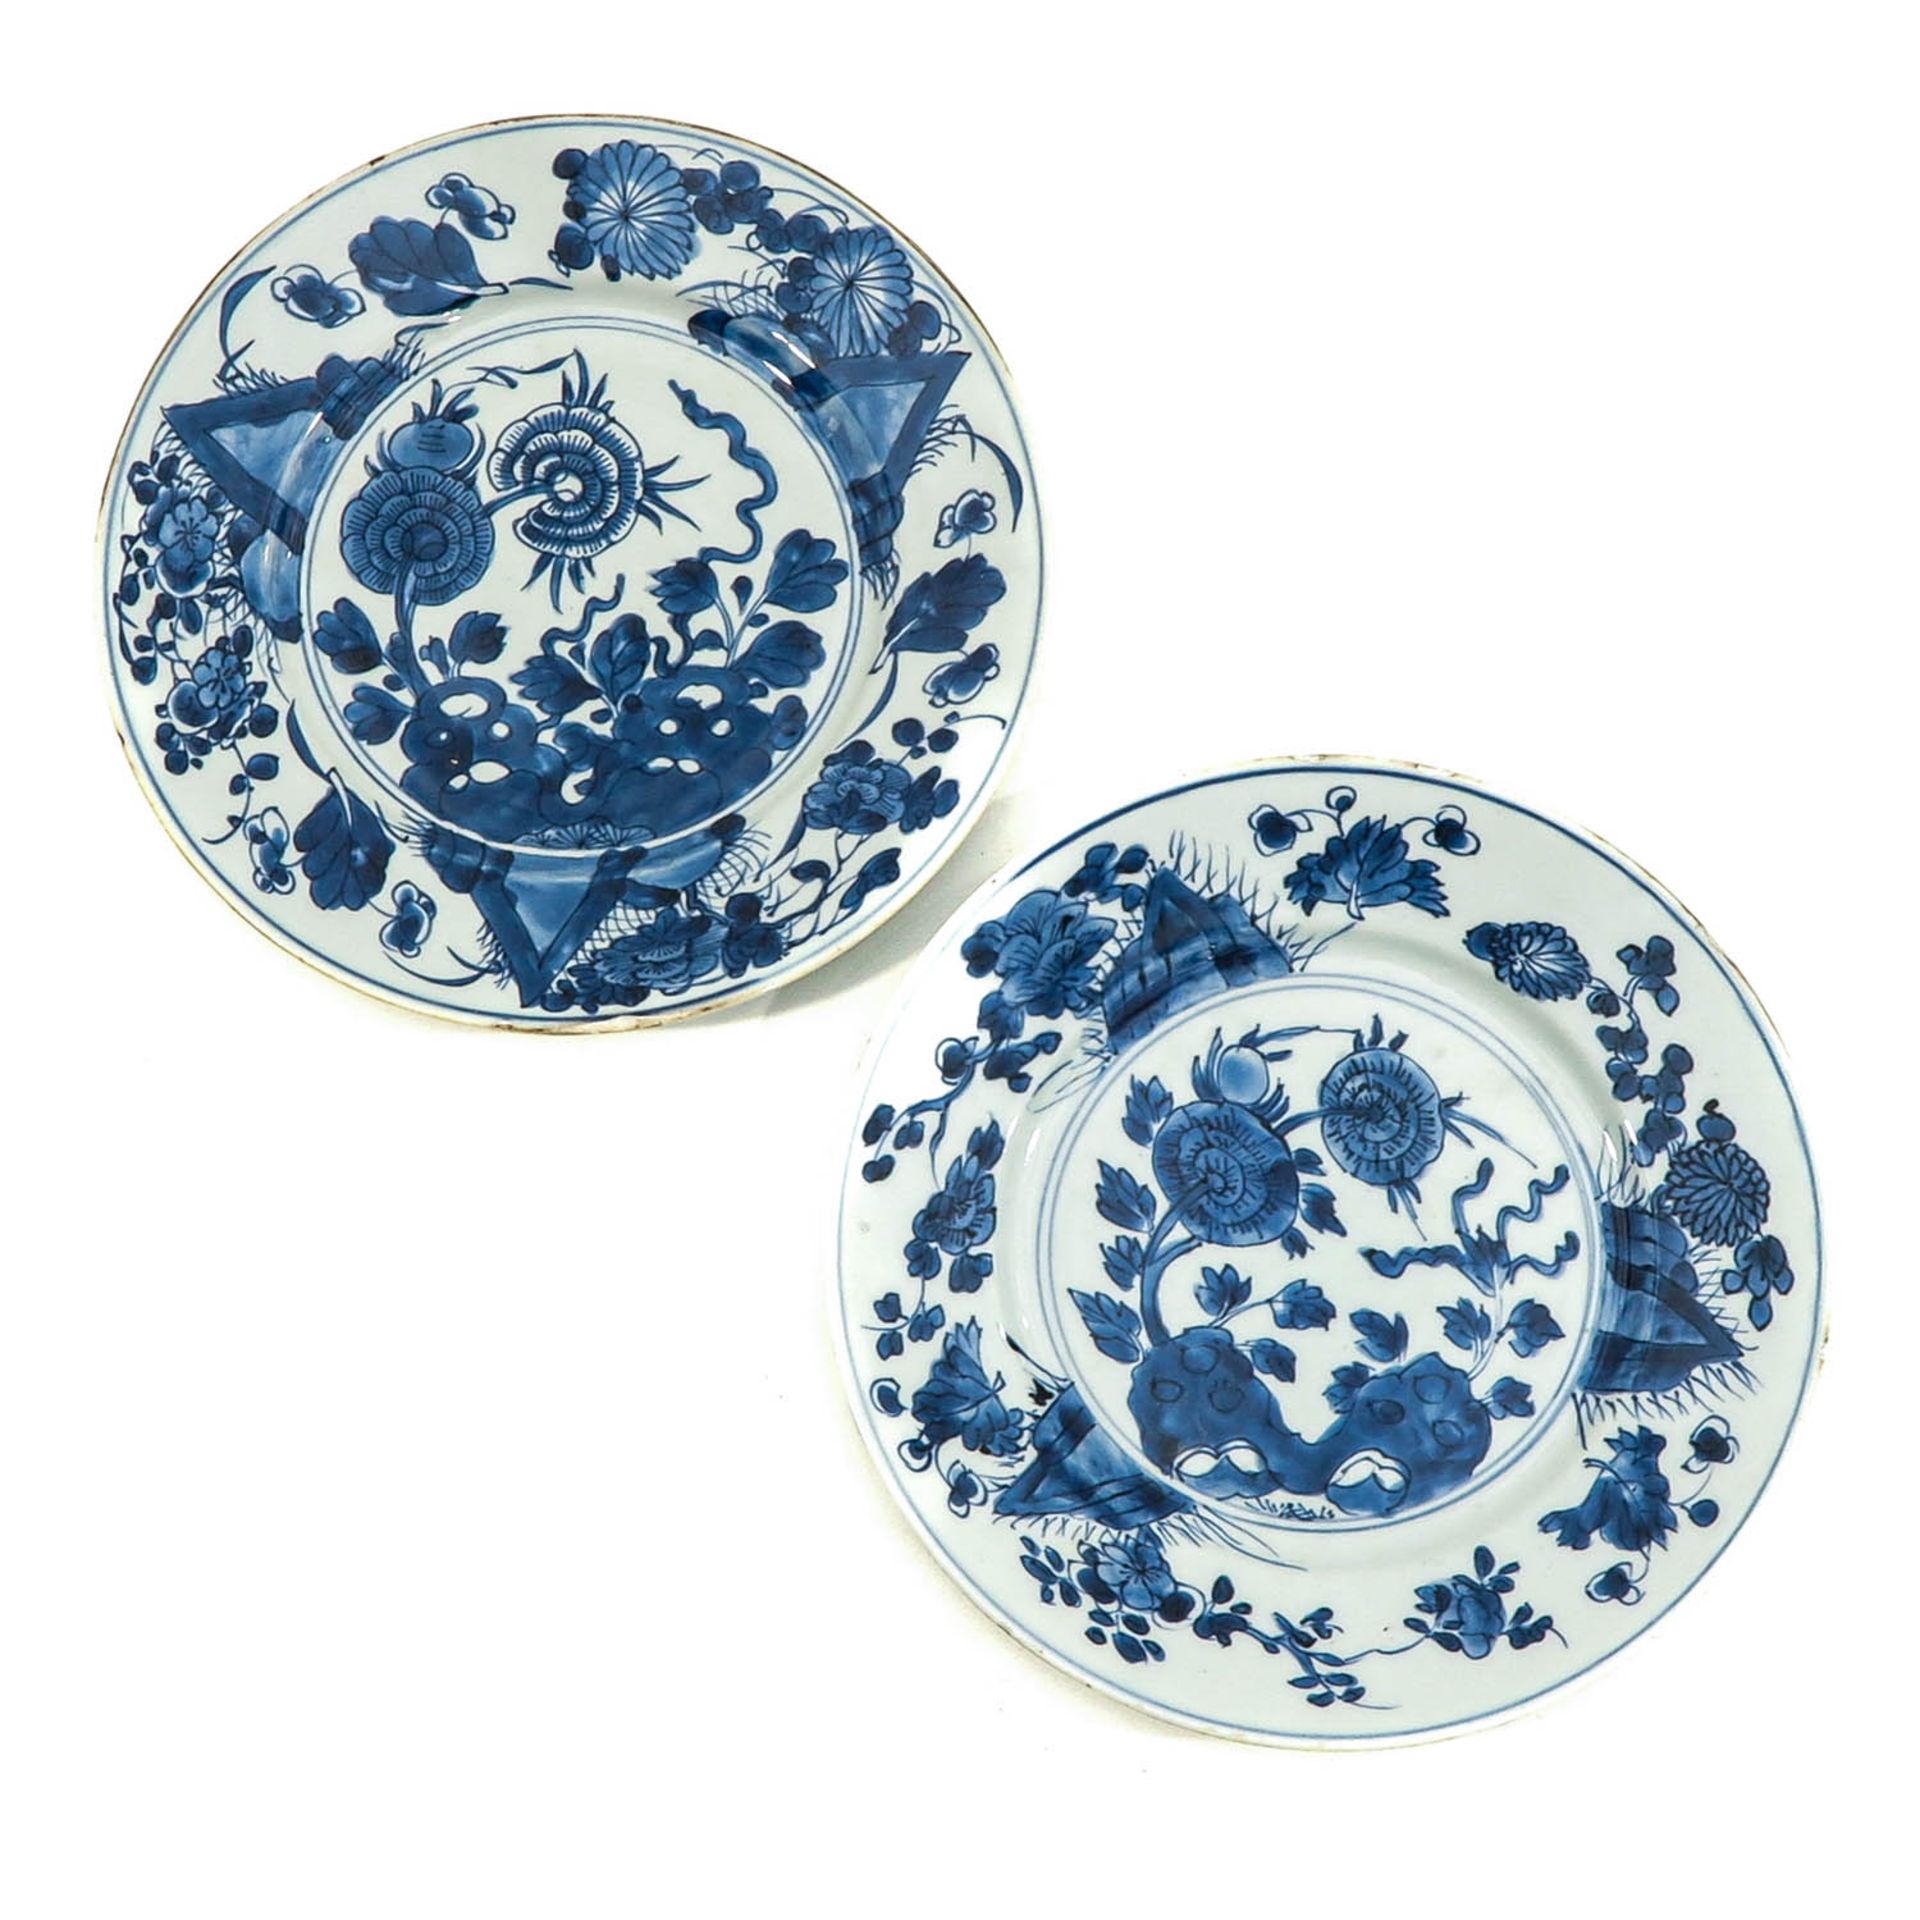 A Series of 5 Blue and White Plates - Bild 5 aus 10